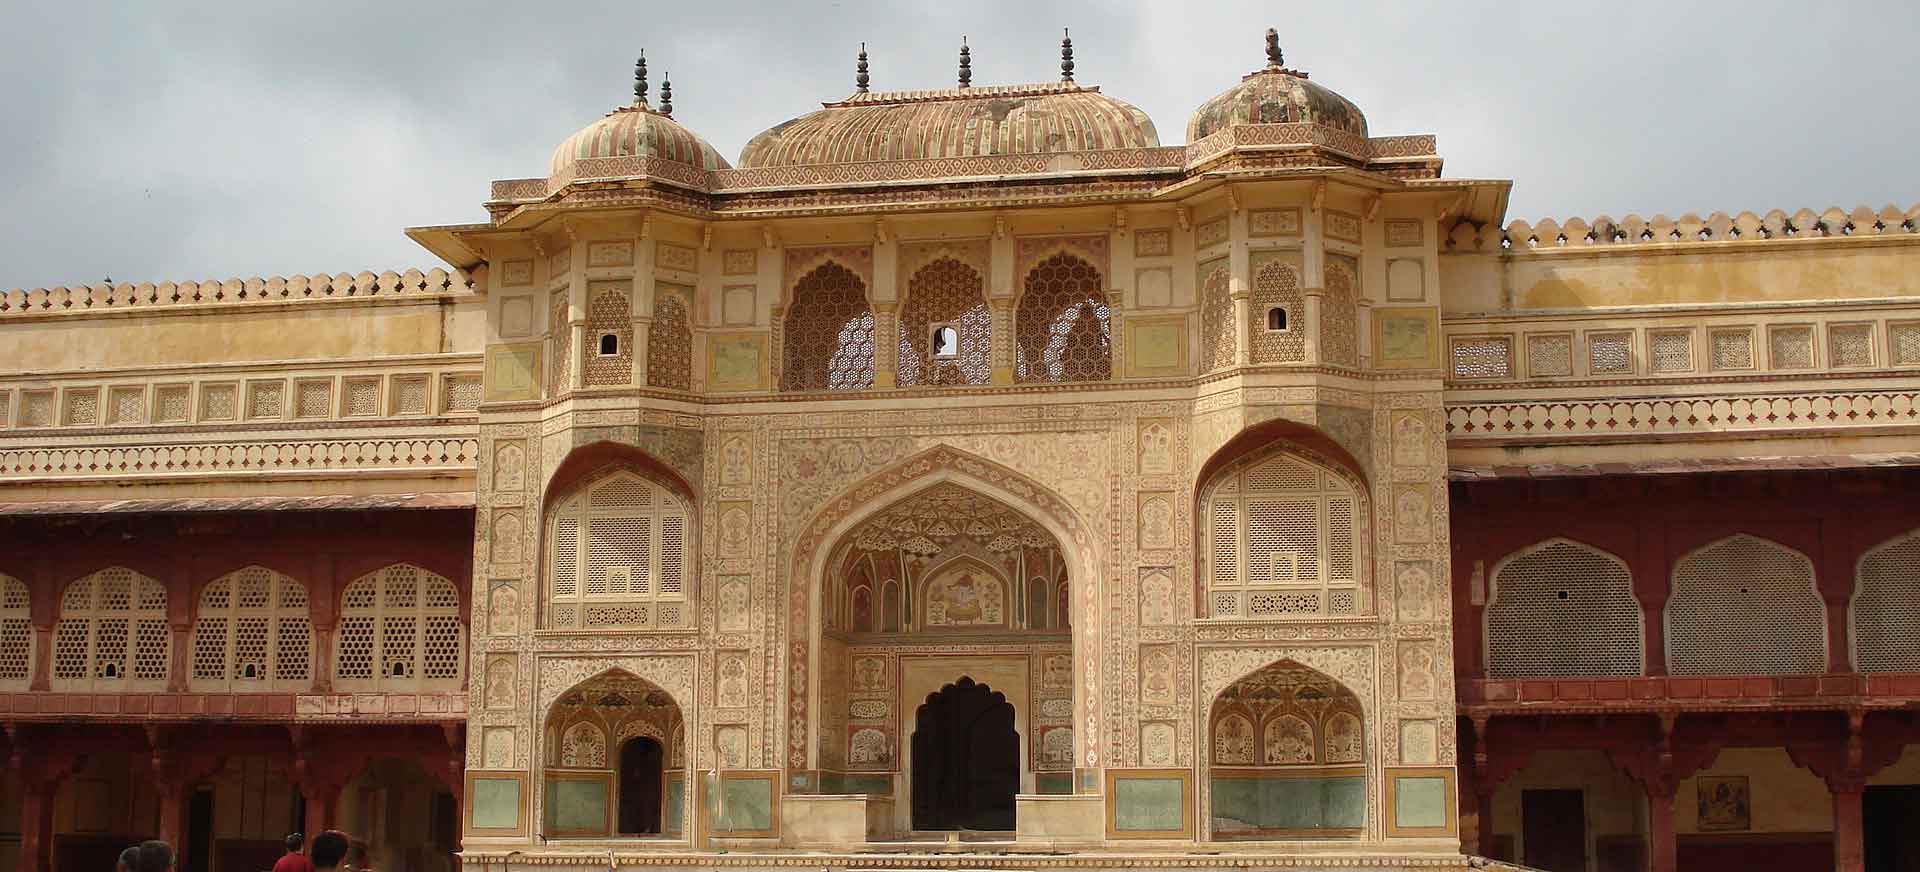 Amber Fort - Jaipur- The Pink City tour